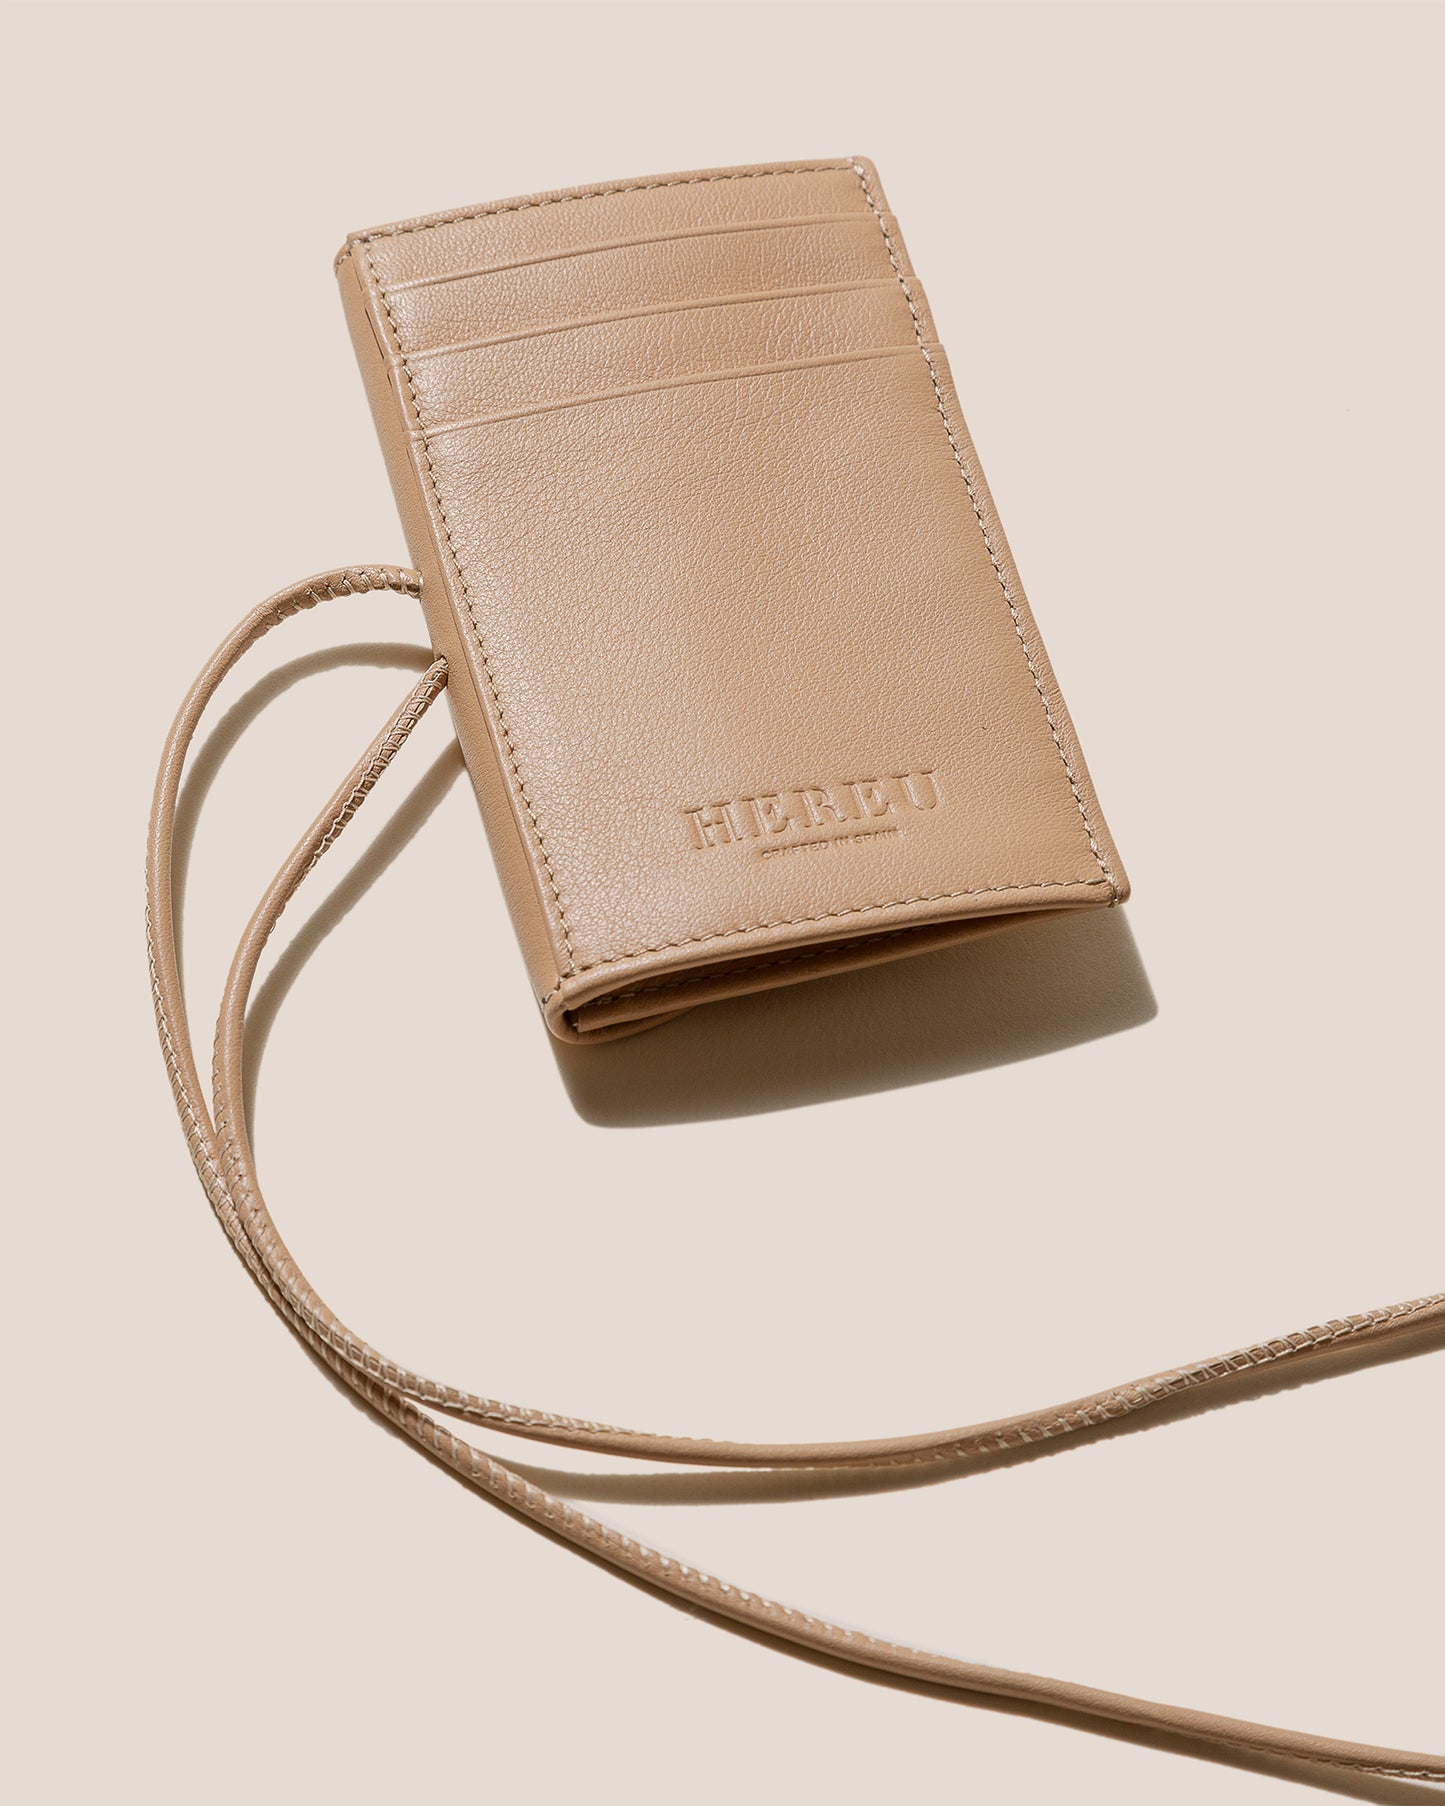 PENJAT - Leather Wallet with Strap